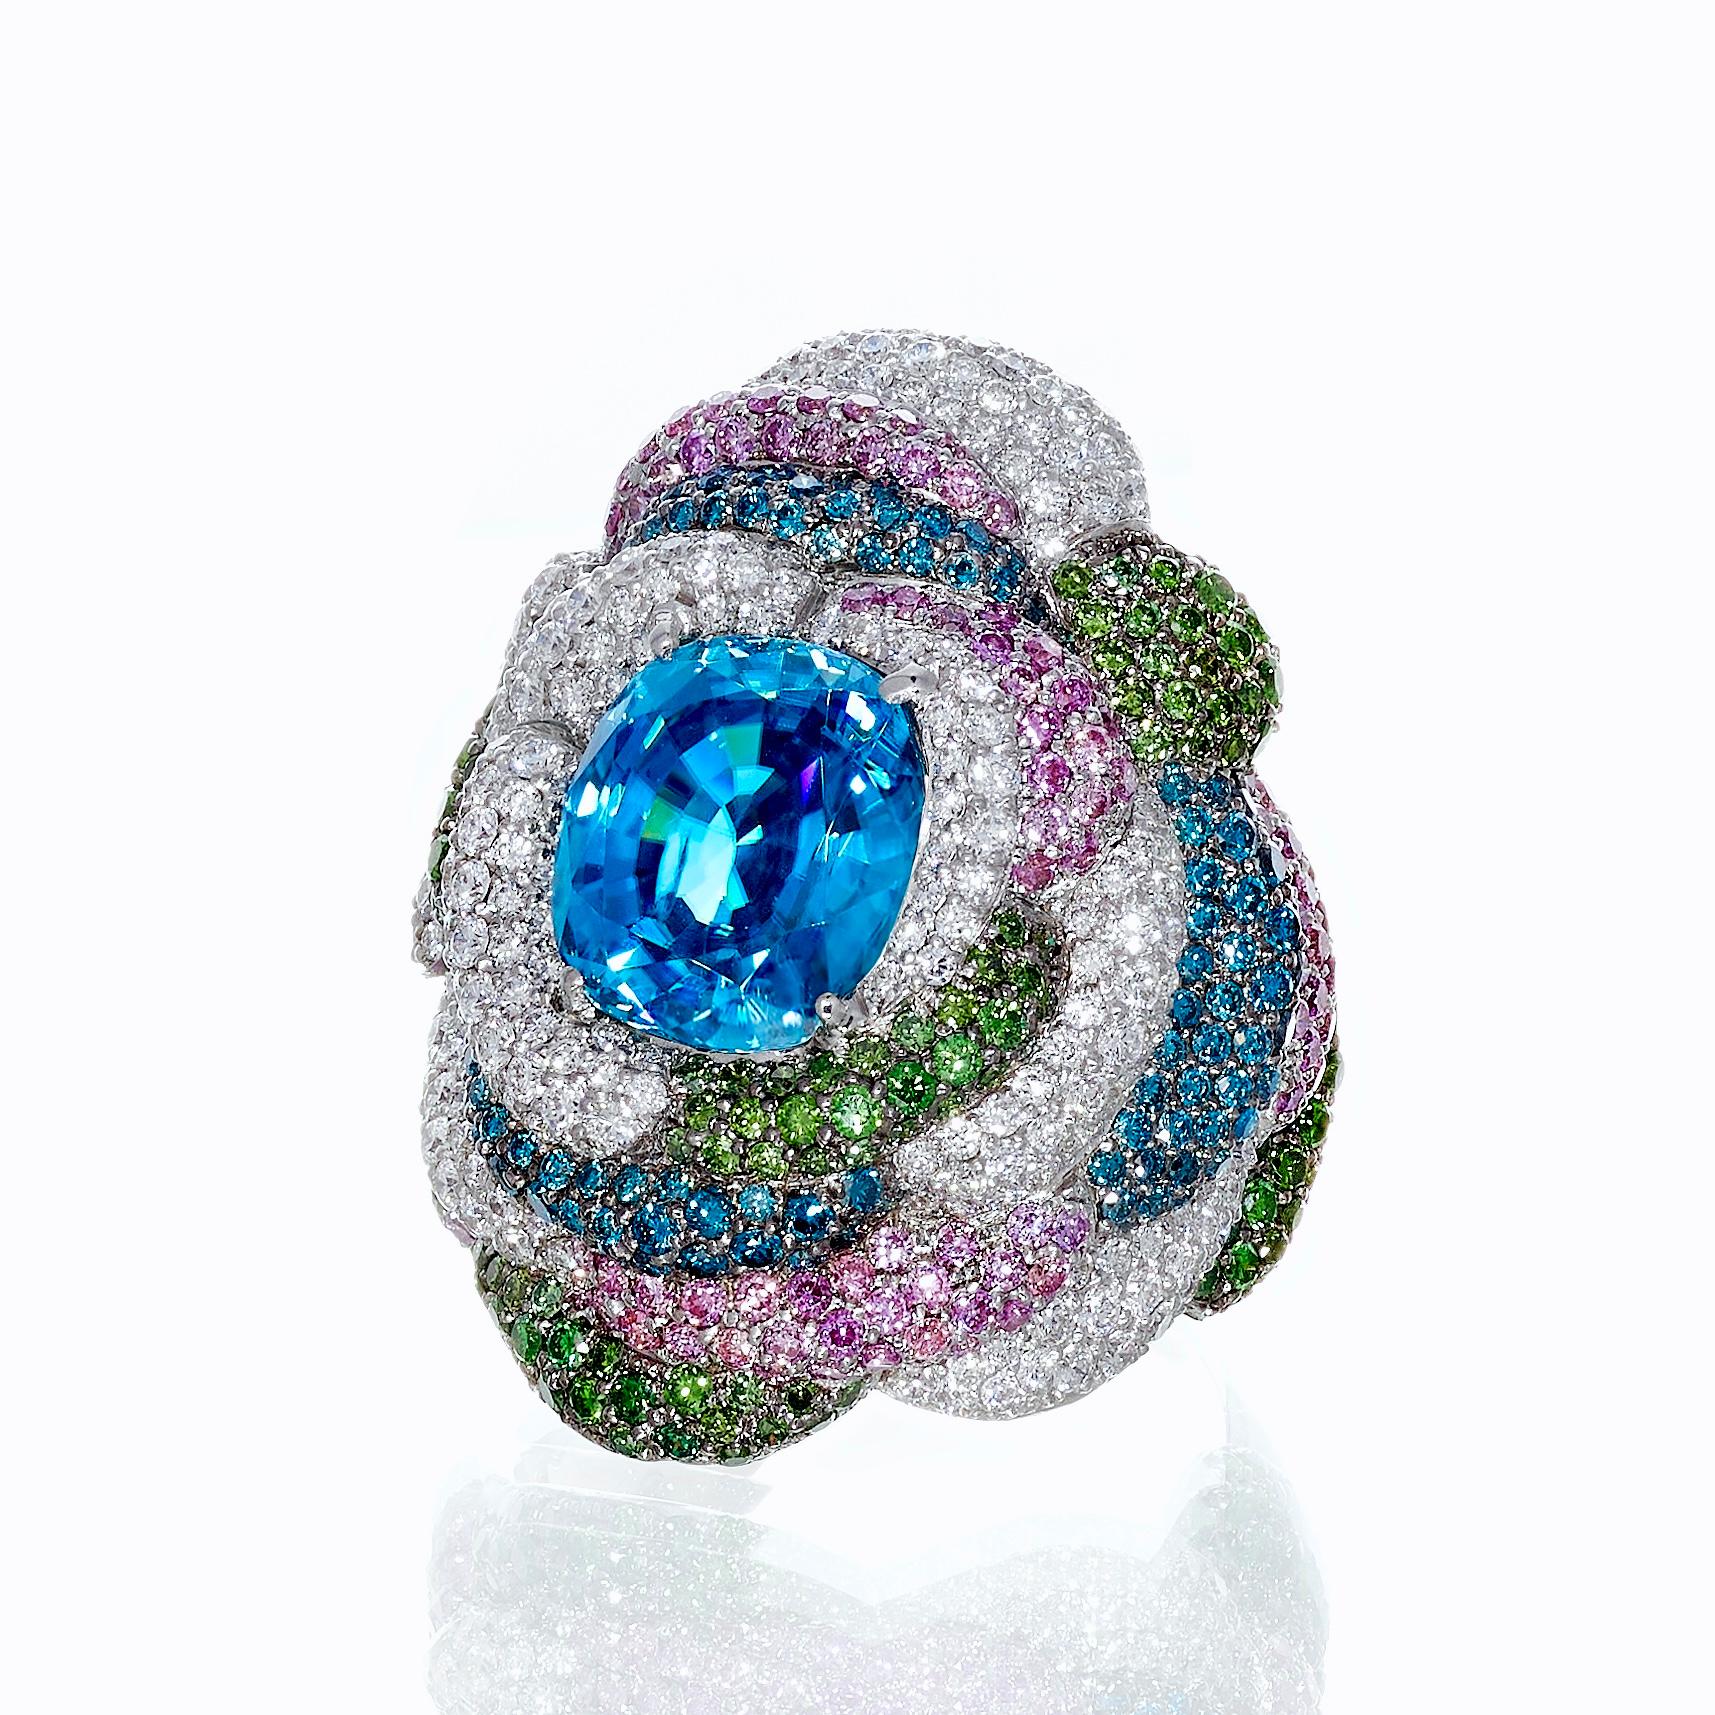 Rosior Contemporary Cocktail Ring set in White Gold with:
- 1 Cushion Cut Blue Zircon weighing 7,16 ct;
- 261 F Color, VVS Clarity Diamonds weighing 1,49 ct;
- 167 Green Diamonds weighing 1,08 ct;
- 124 Blue Diamonds weighing 0,81 ct;
- 147 Pink